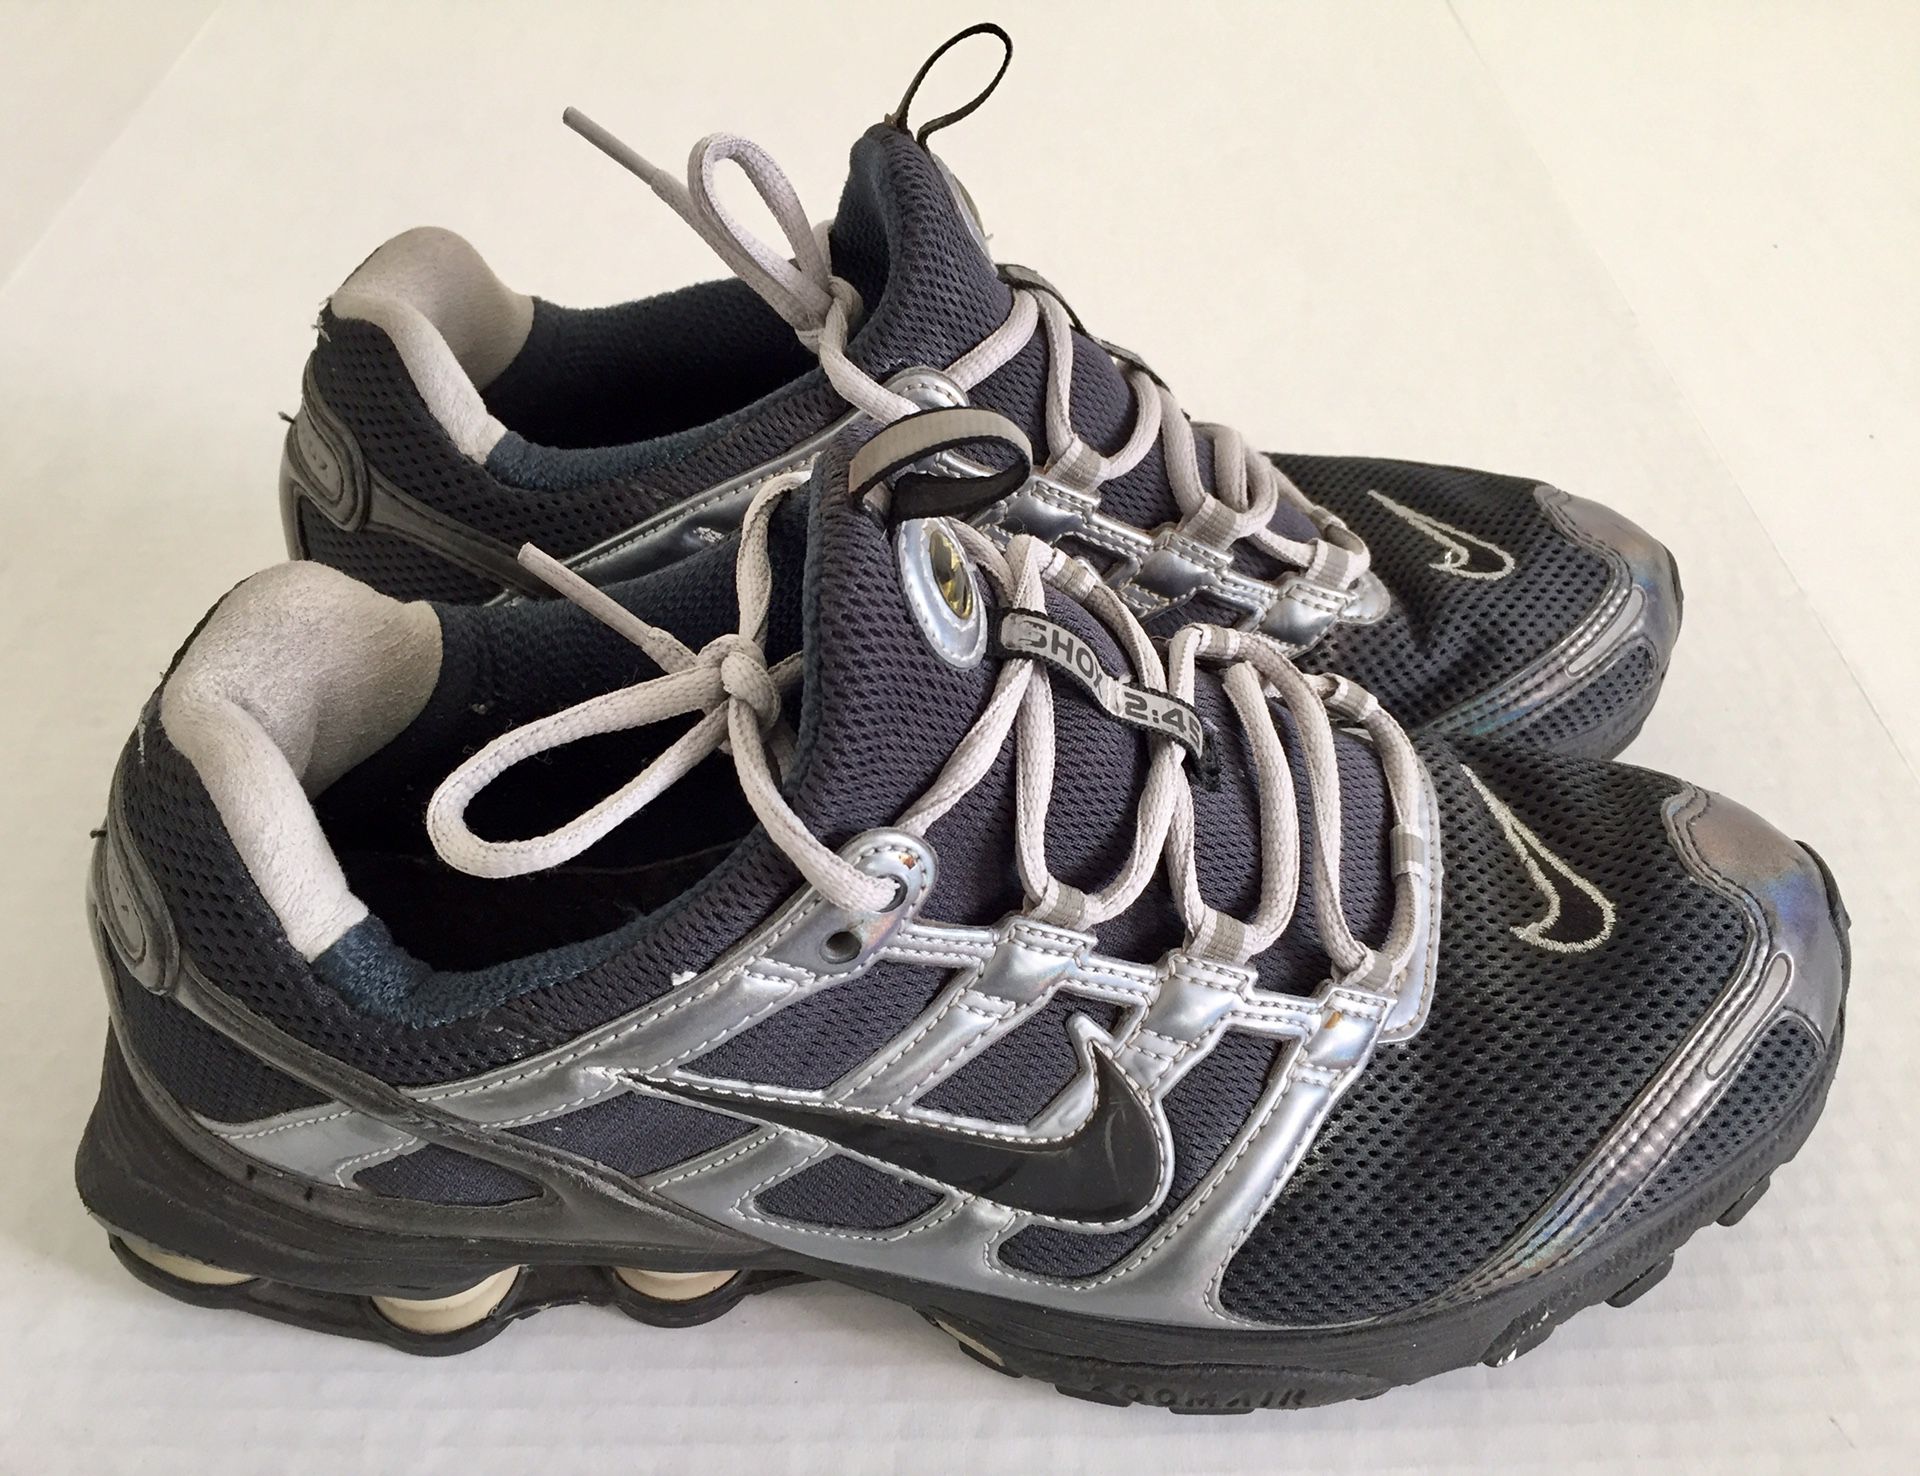 Nike Shox 2:45 Gray Silver Black Cross Training Running Shoes Mens info removed} for Sale in Tempe, AZ OfferUp